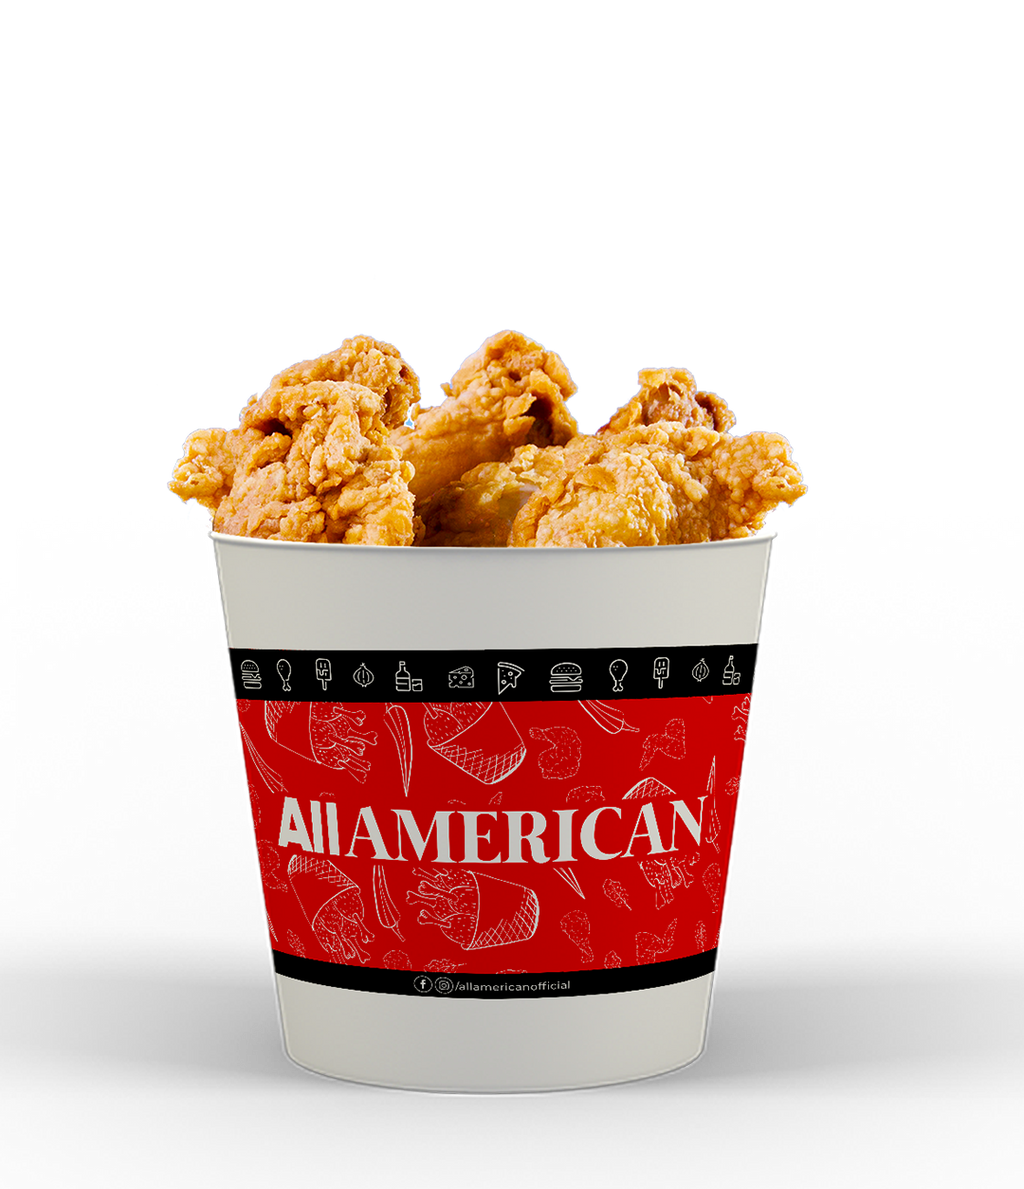 Enjoy crispy, and juicy flavorful 6pcs. Country Style Fried Chicken from AllAmerican, coated in a special batter recipe and deep-fried to achieve the perfect crunch!